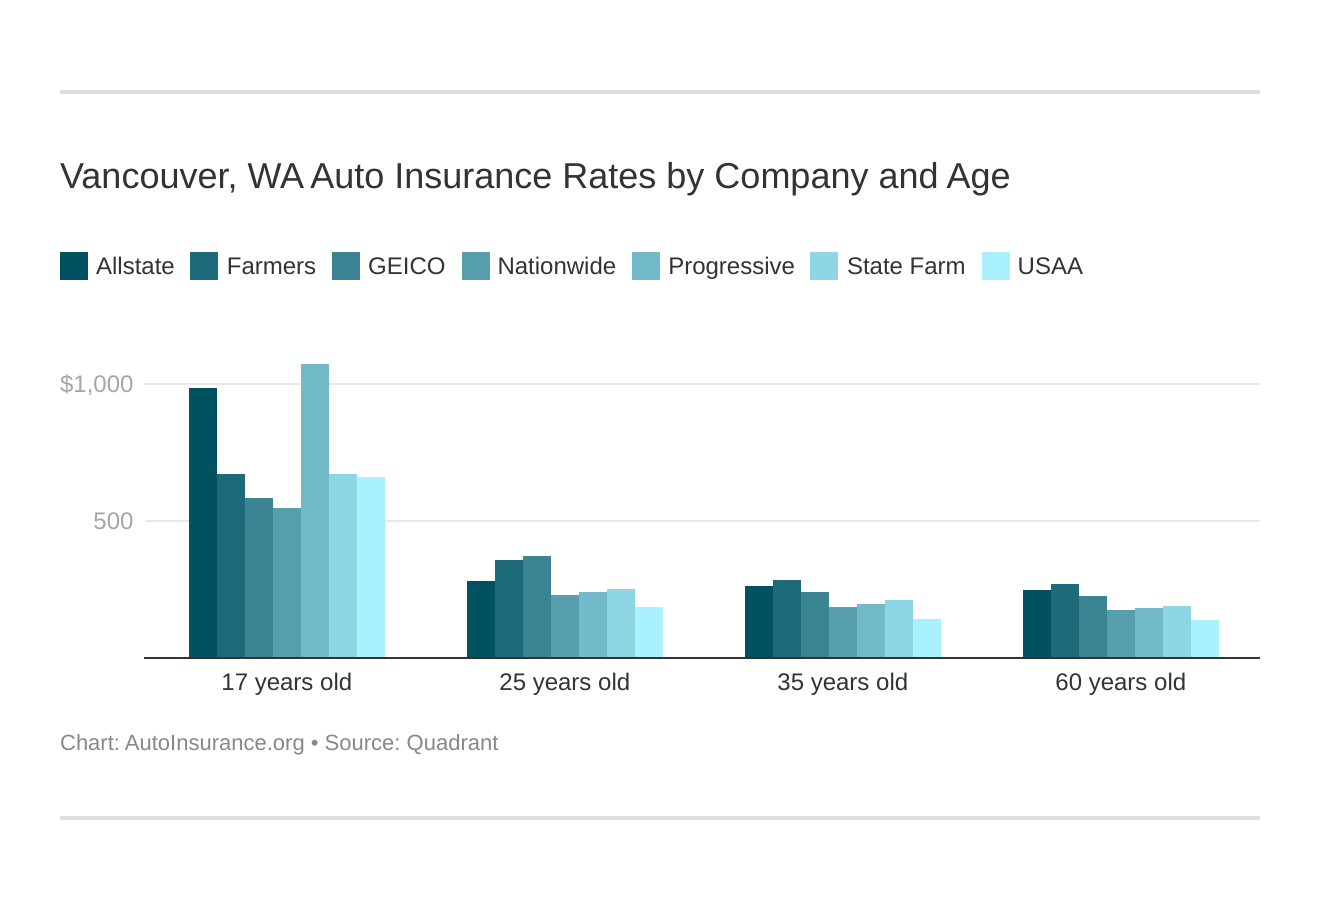 Vancouver, WA Auto Insurance Rates by Company and Age